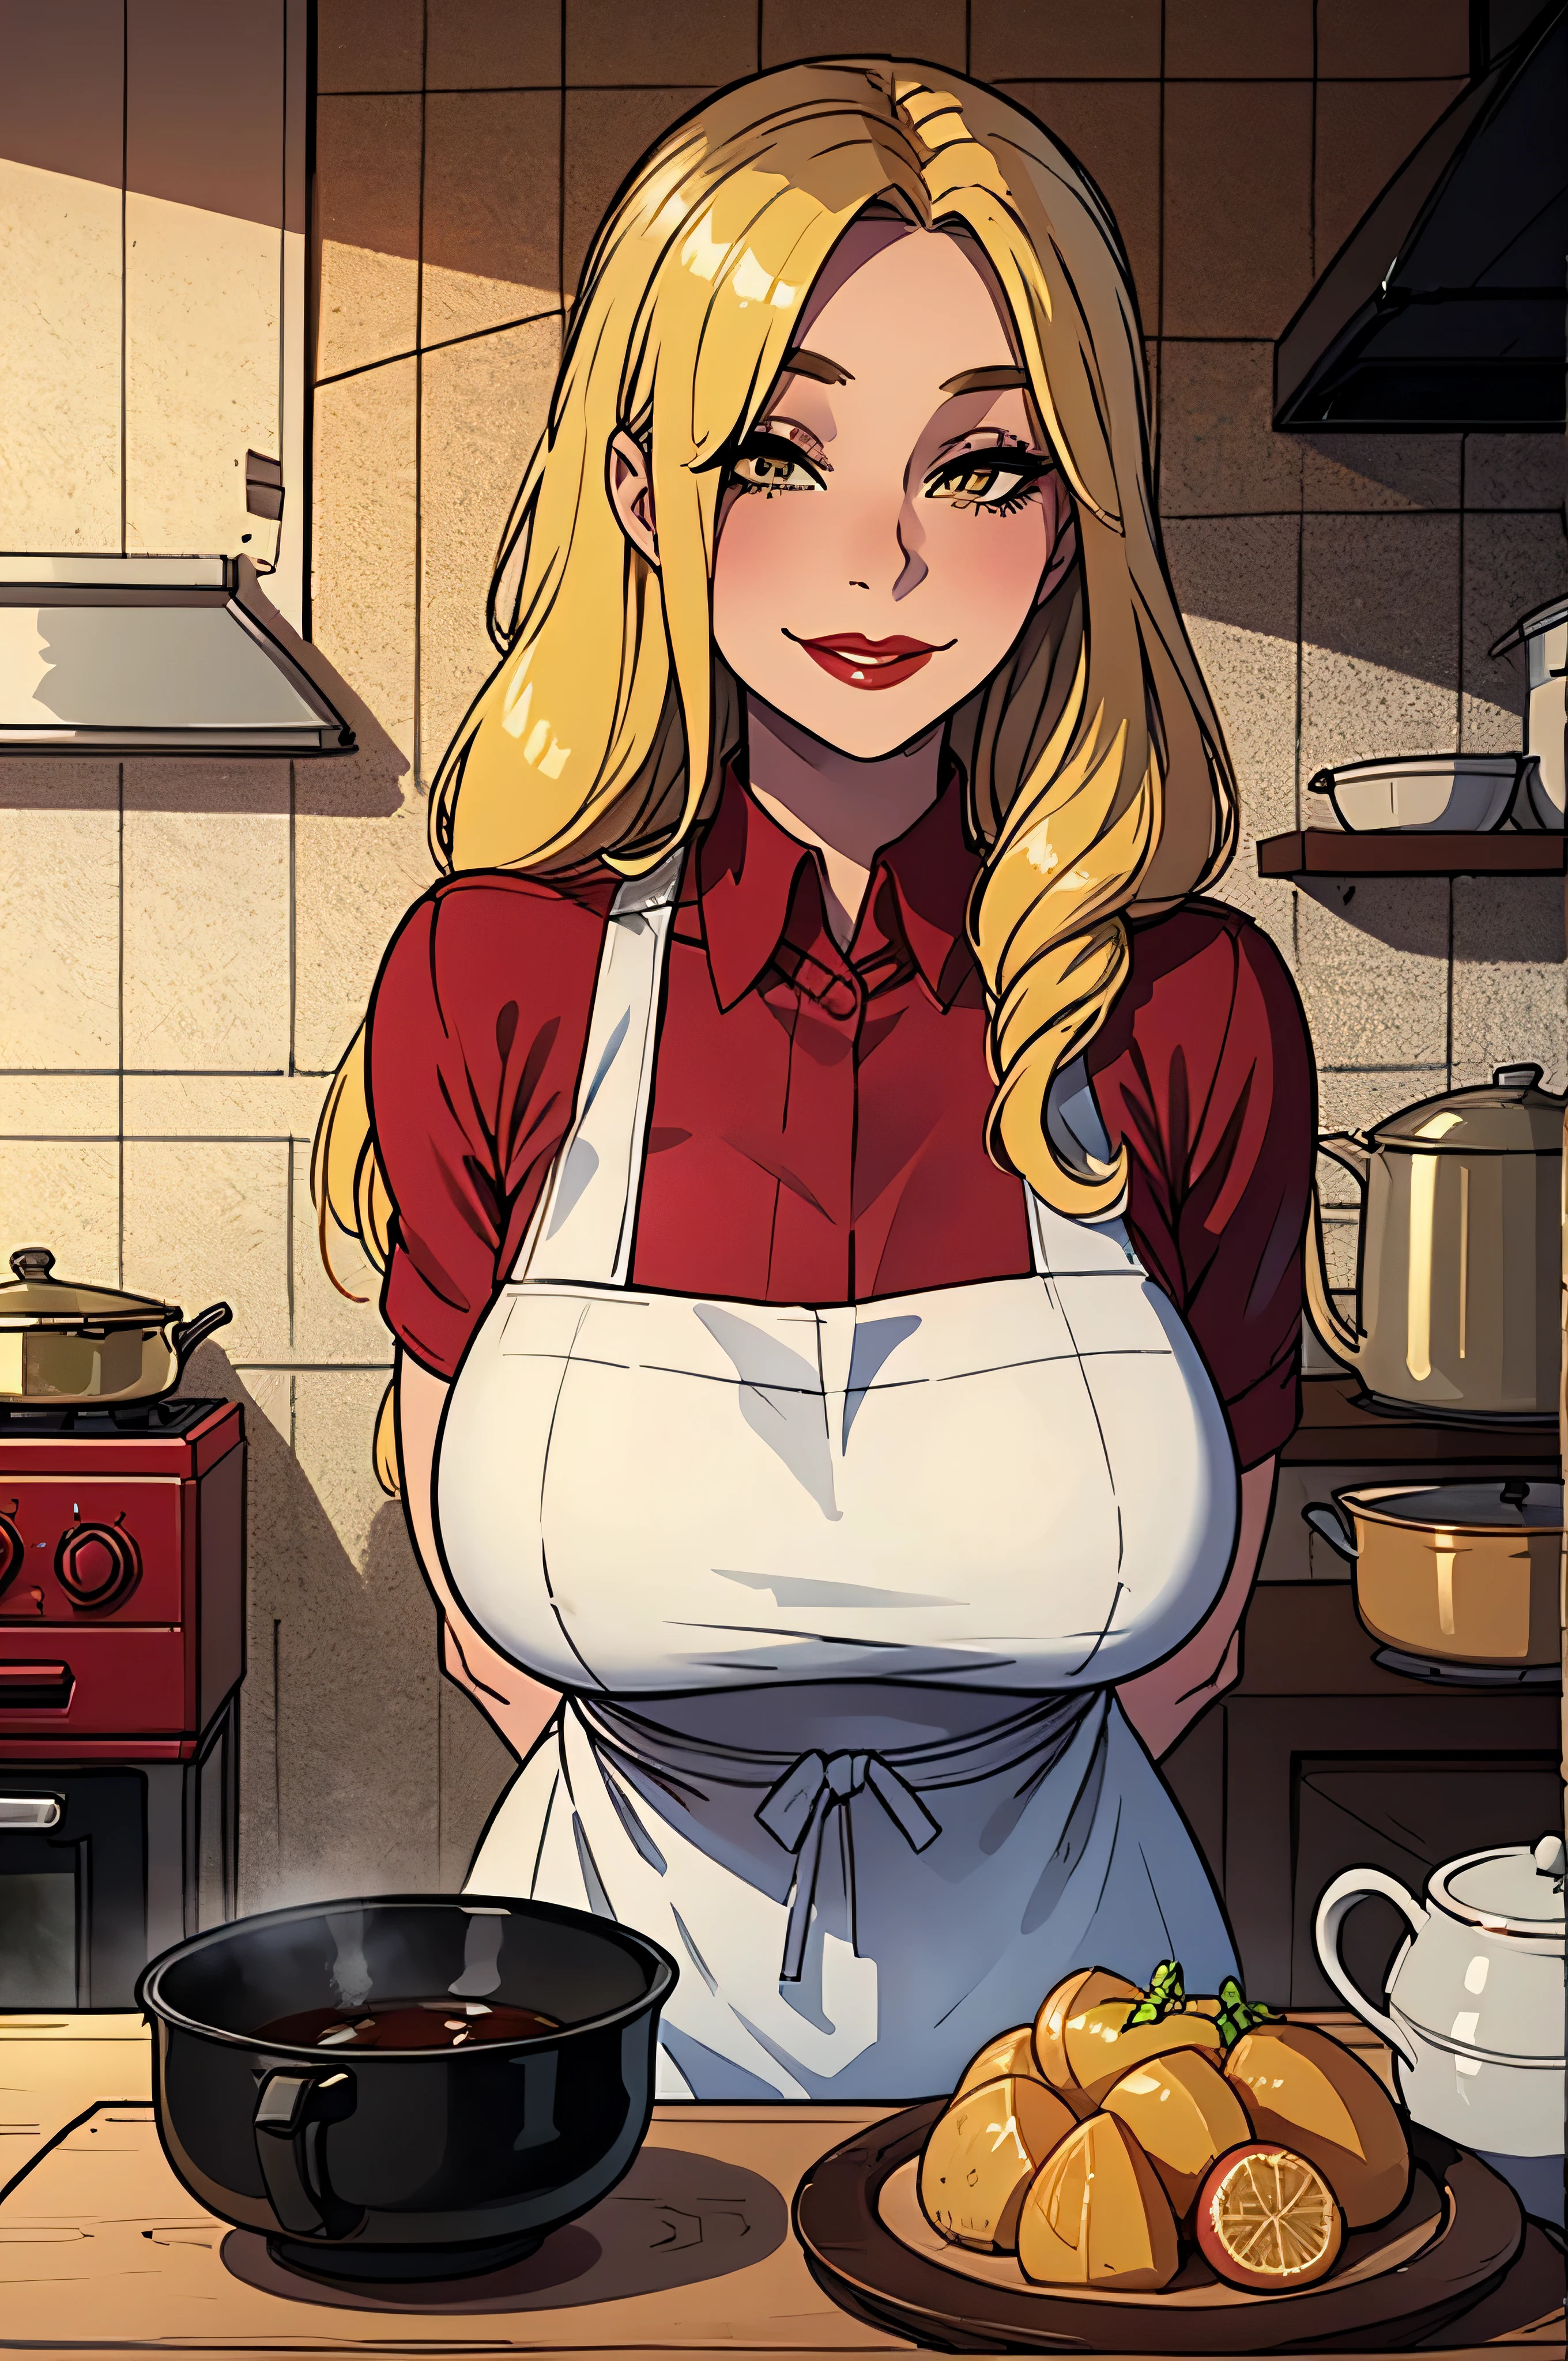 Masterpiece, best quality, 30 years old, traditional house wife, motherly aura and figure, portrait, portrait style photo, female, olive skin, face in center of photo, arms behind back, teasing, motherly expression, big smile,no make-up, red lips, modest clothing and apron, long flowing hair, pastel yellow hair, country house kitchen setting, hazel eyes, beautiful 